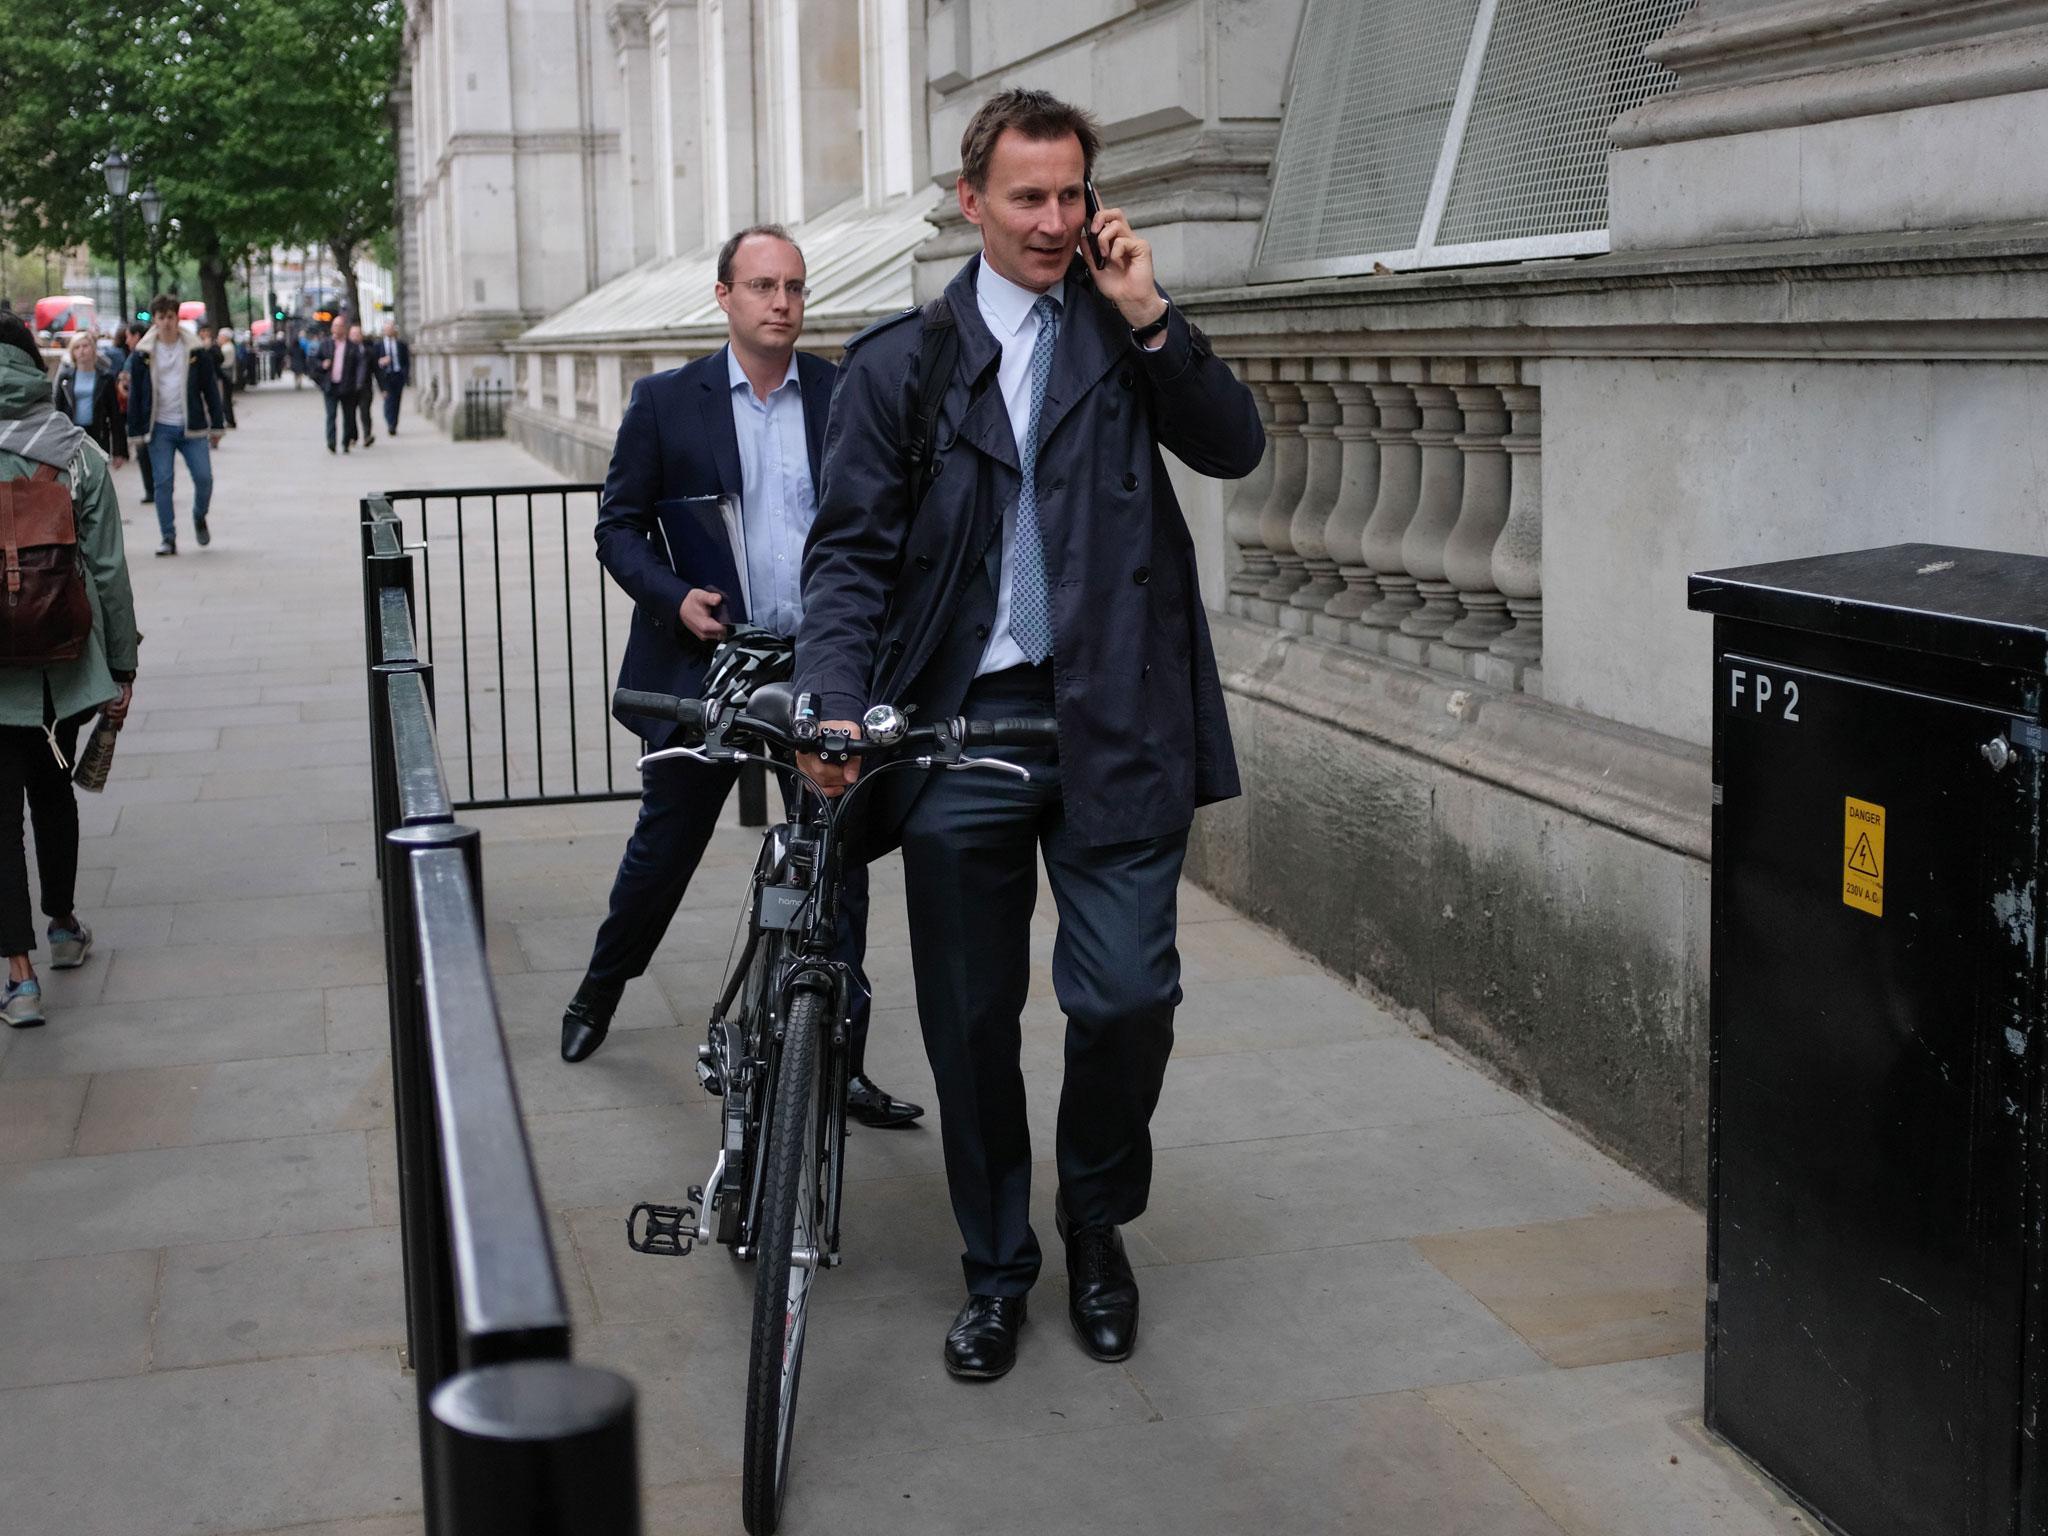 Jeremy Hunt is building a £44,000 private bathroom in his office while calling for £22bn NHS cuts